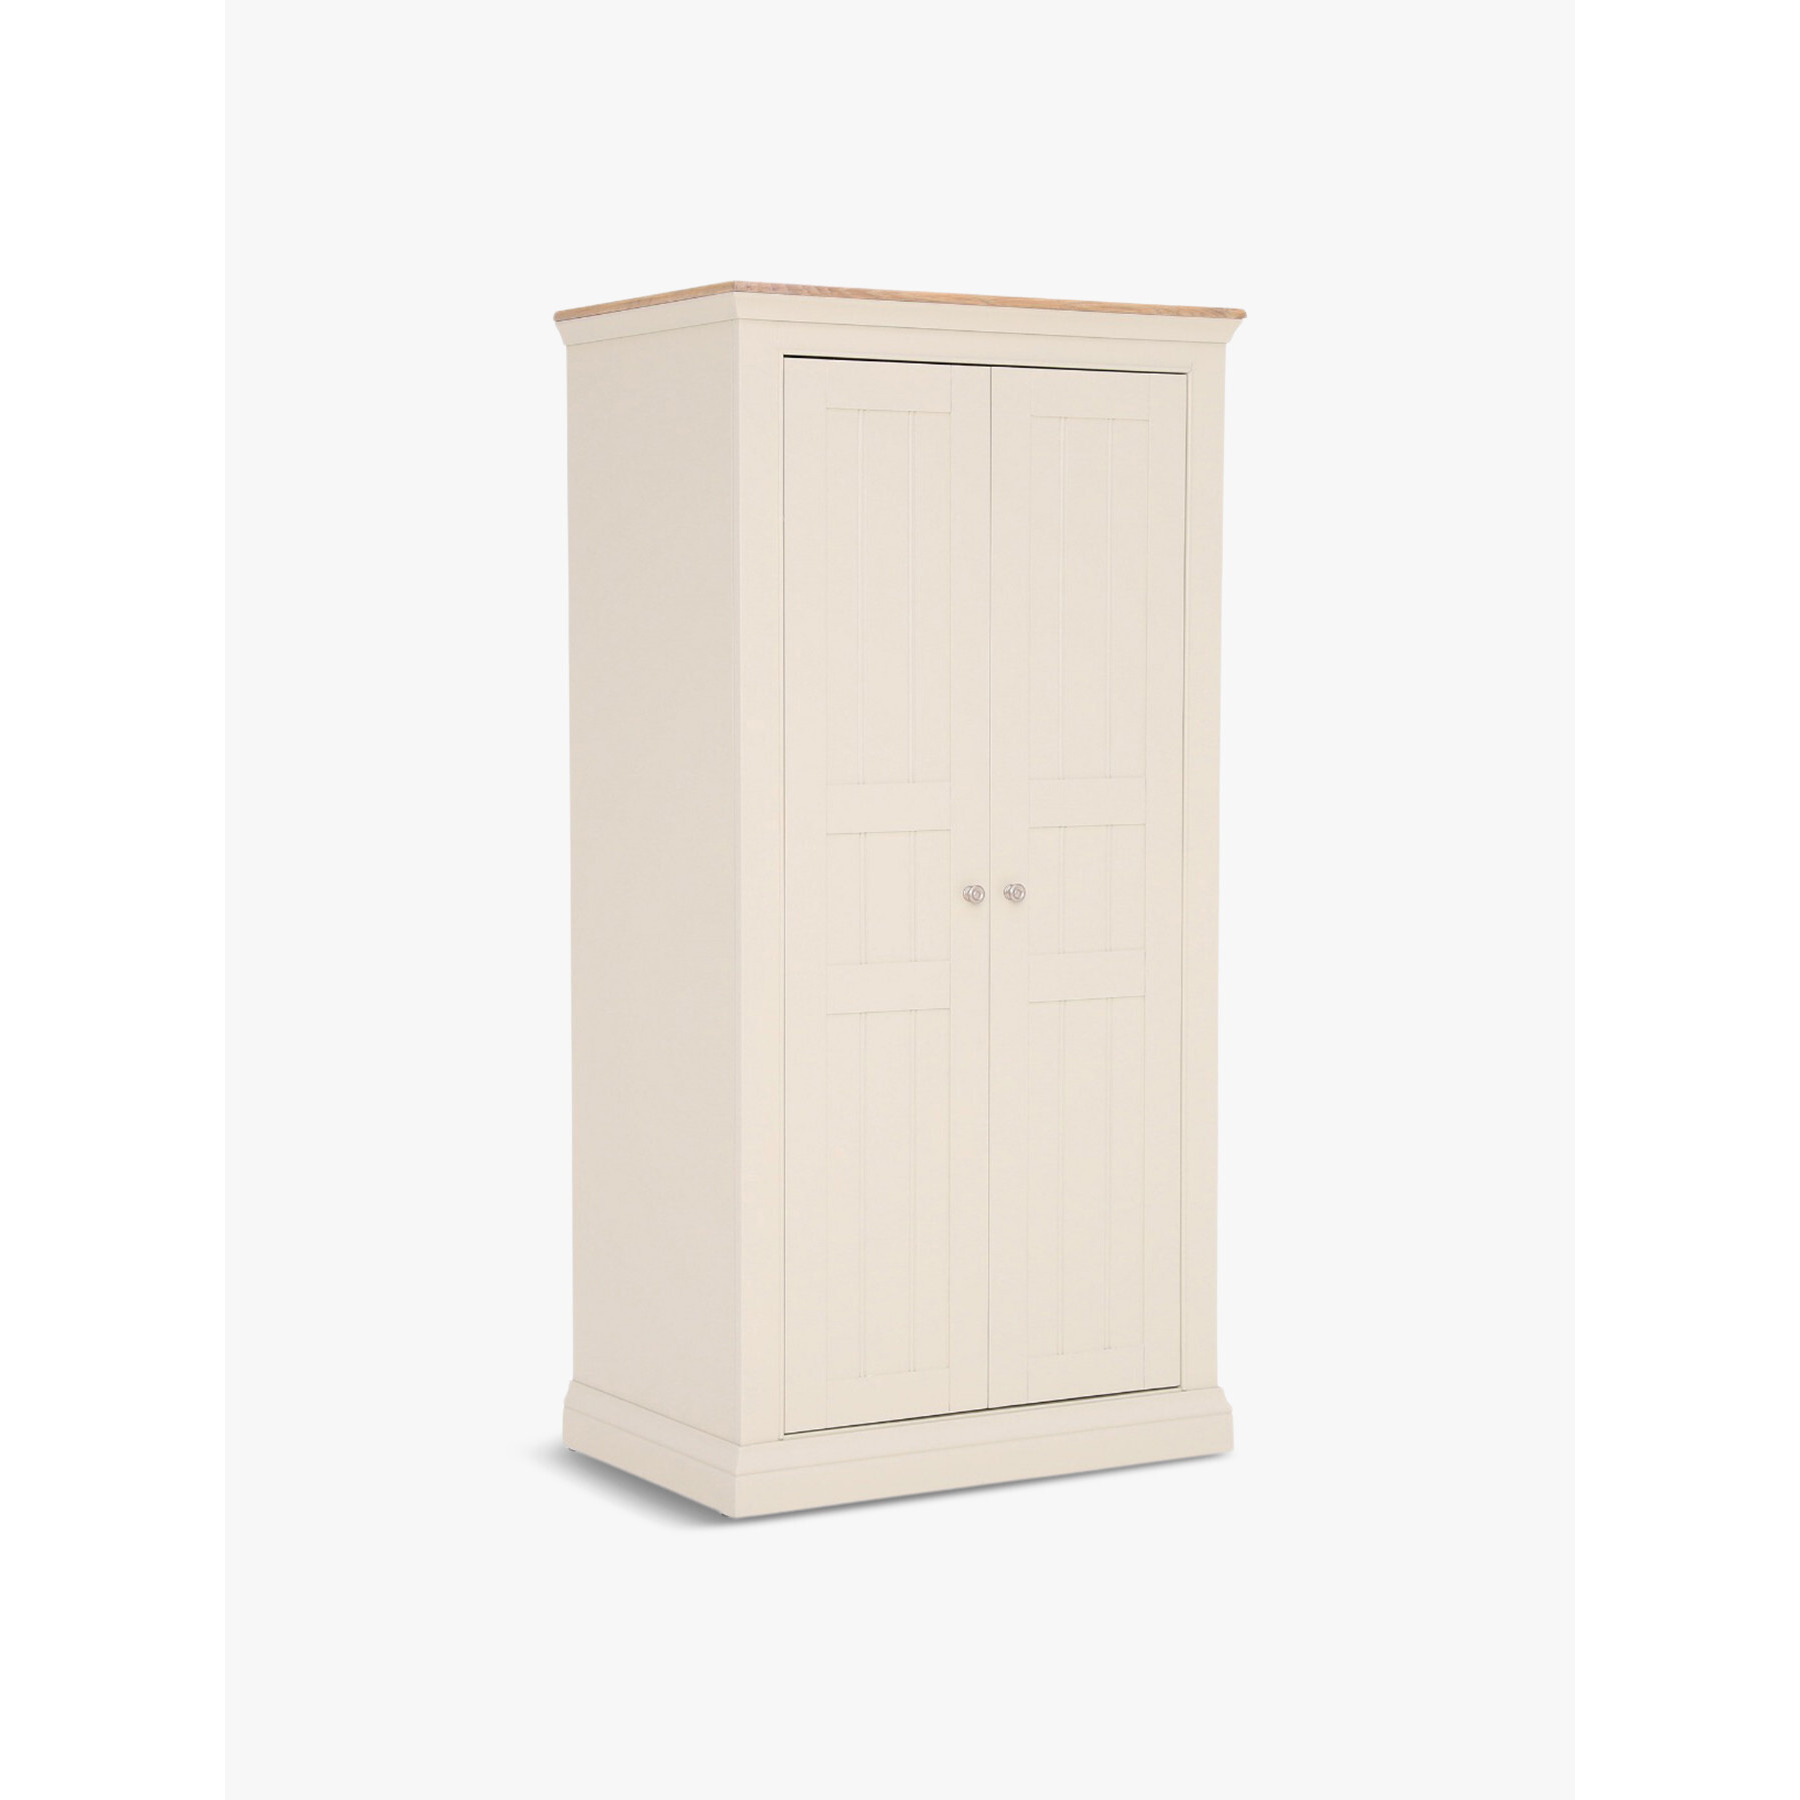 Barker and Stonehouse Staithes Wardrobe, Oak and Ecru Neutral - image 1